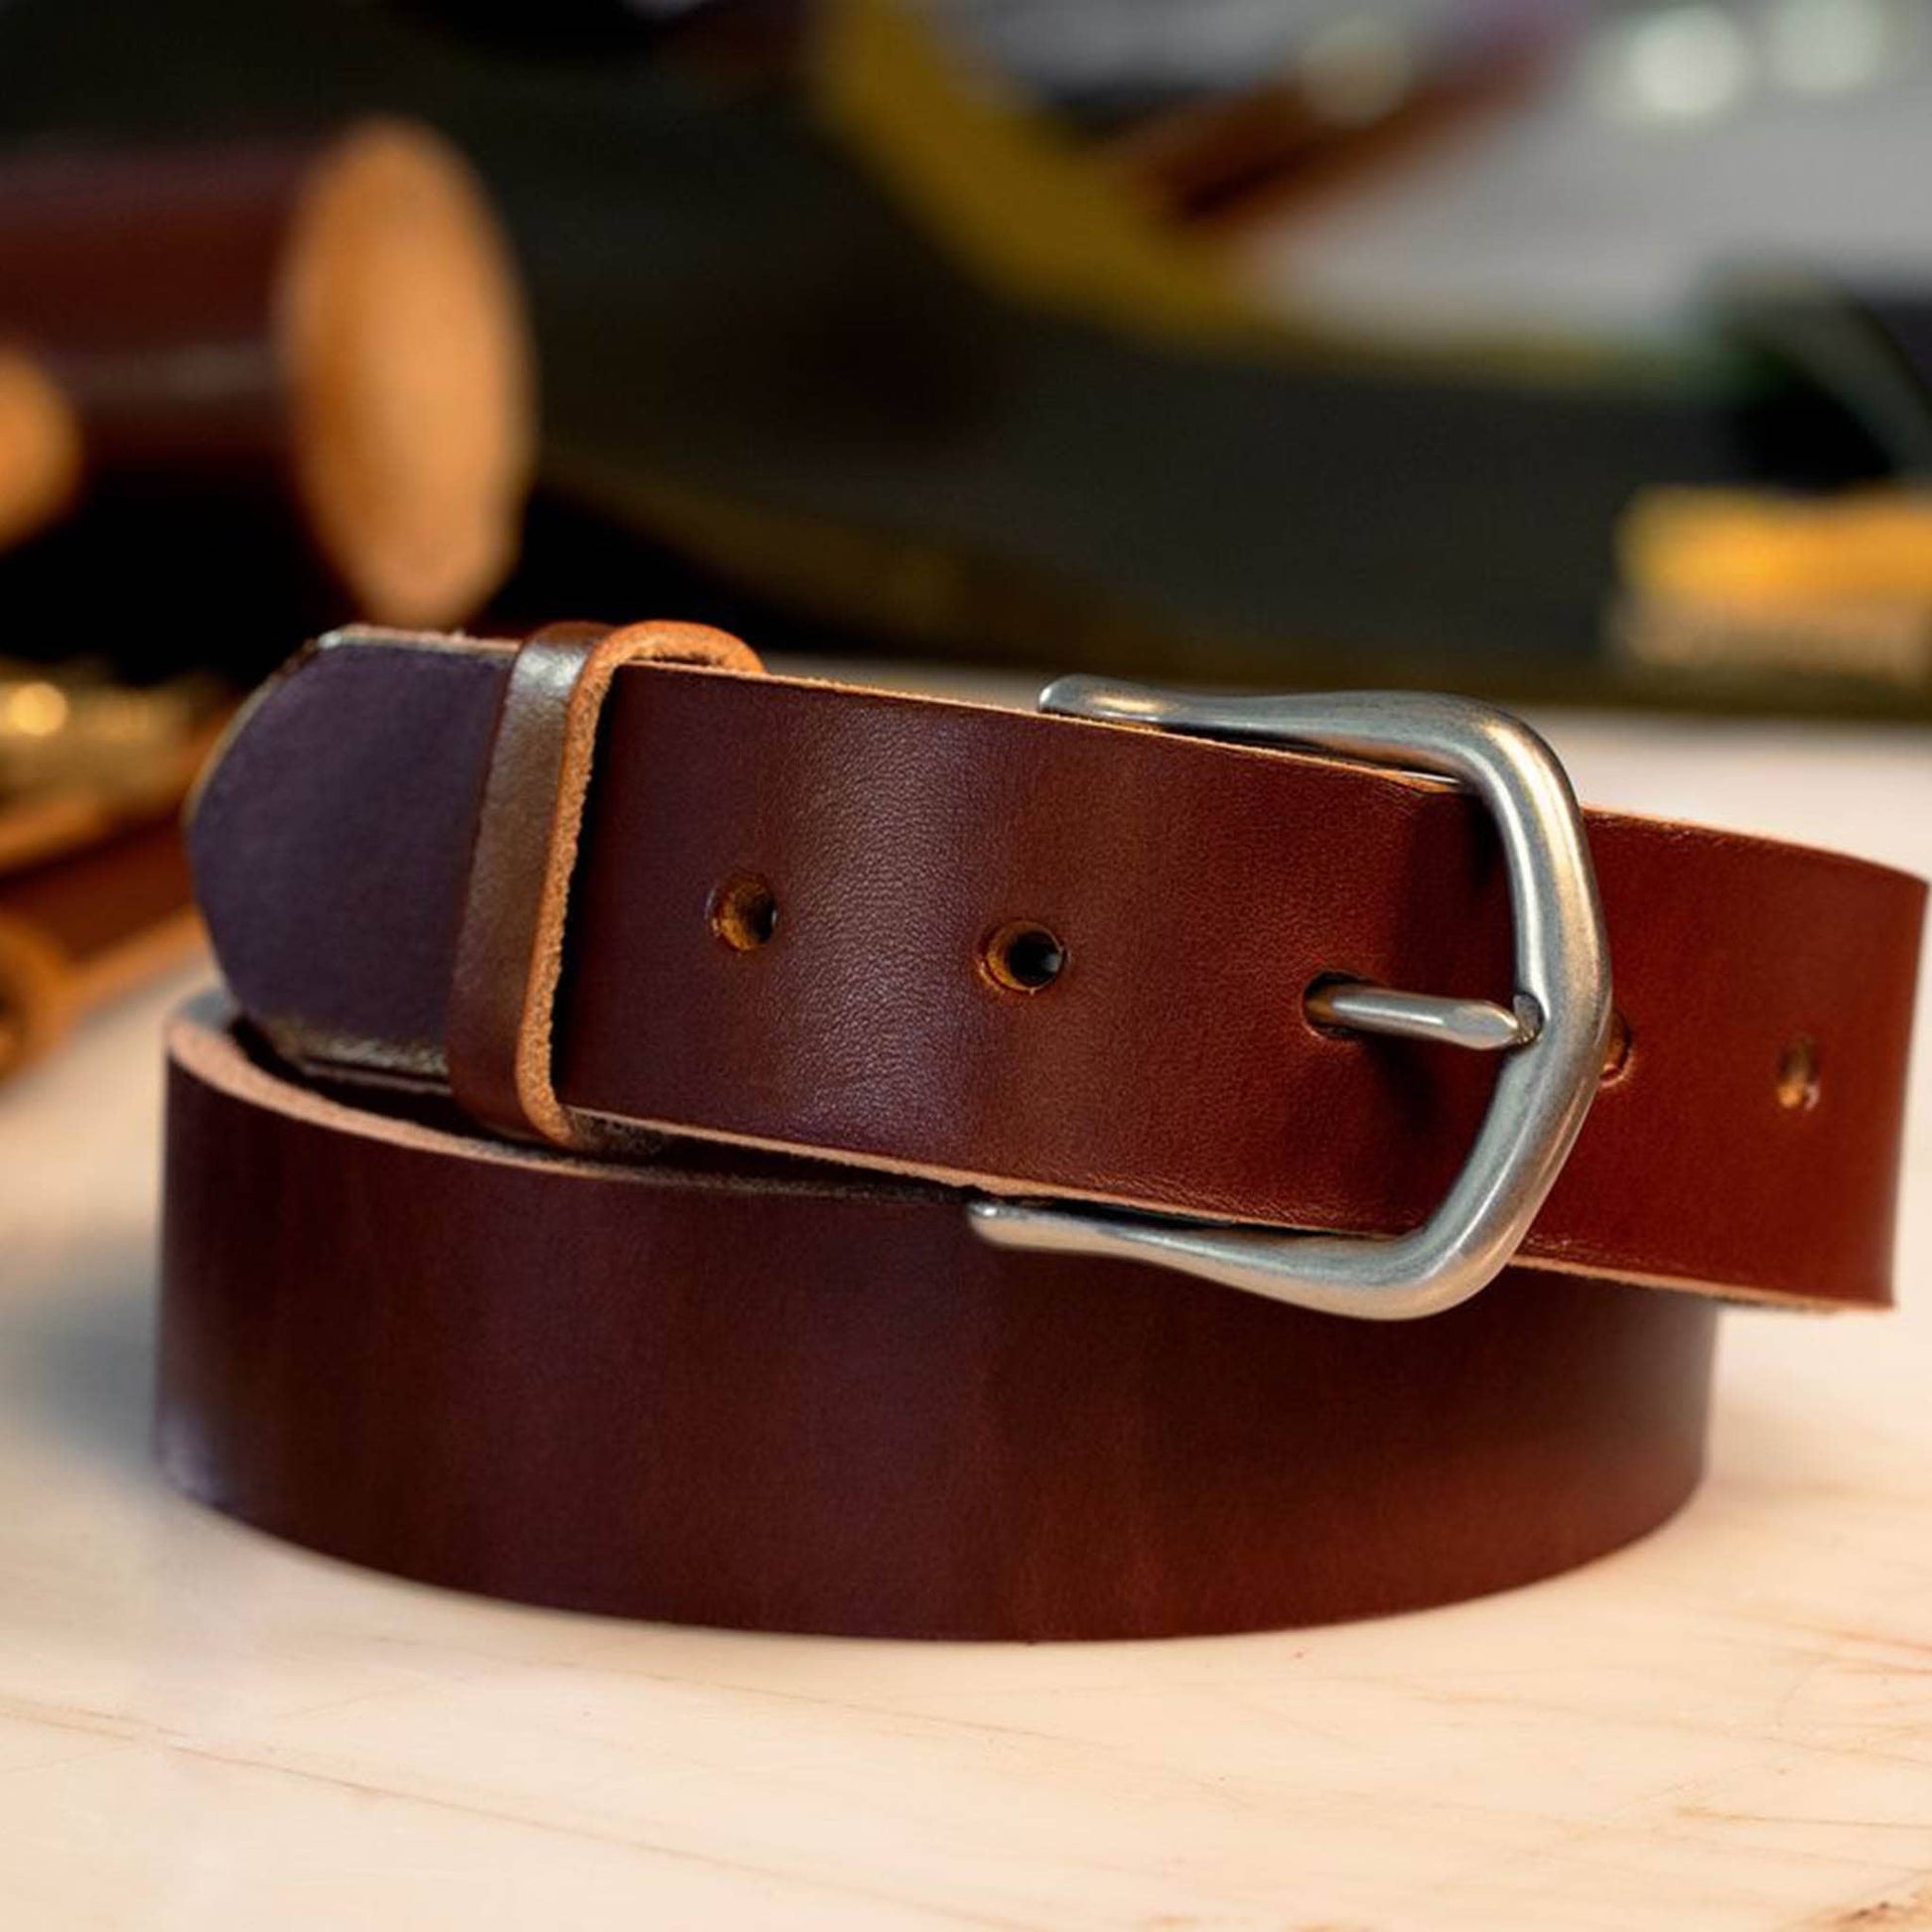 British Brown leather belt with a nickel matte semi dress buckle.